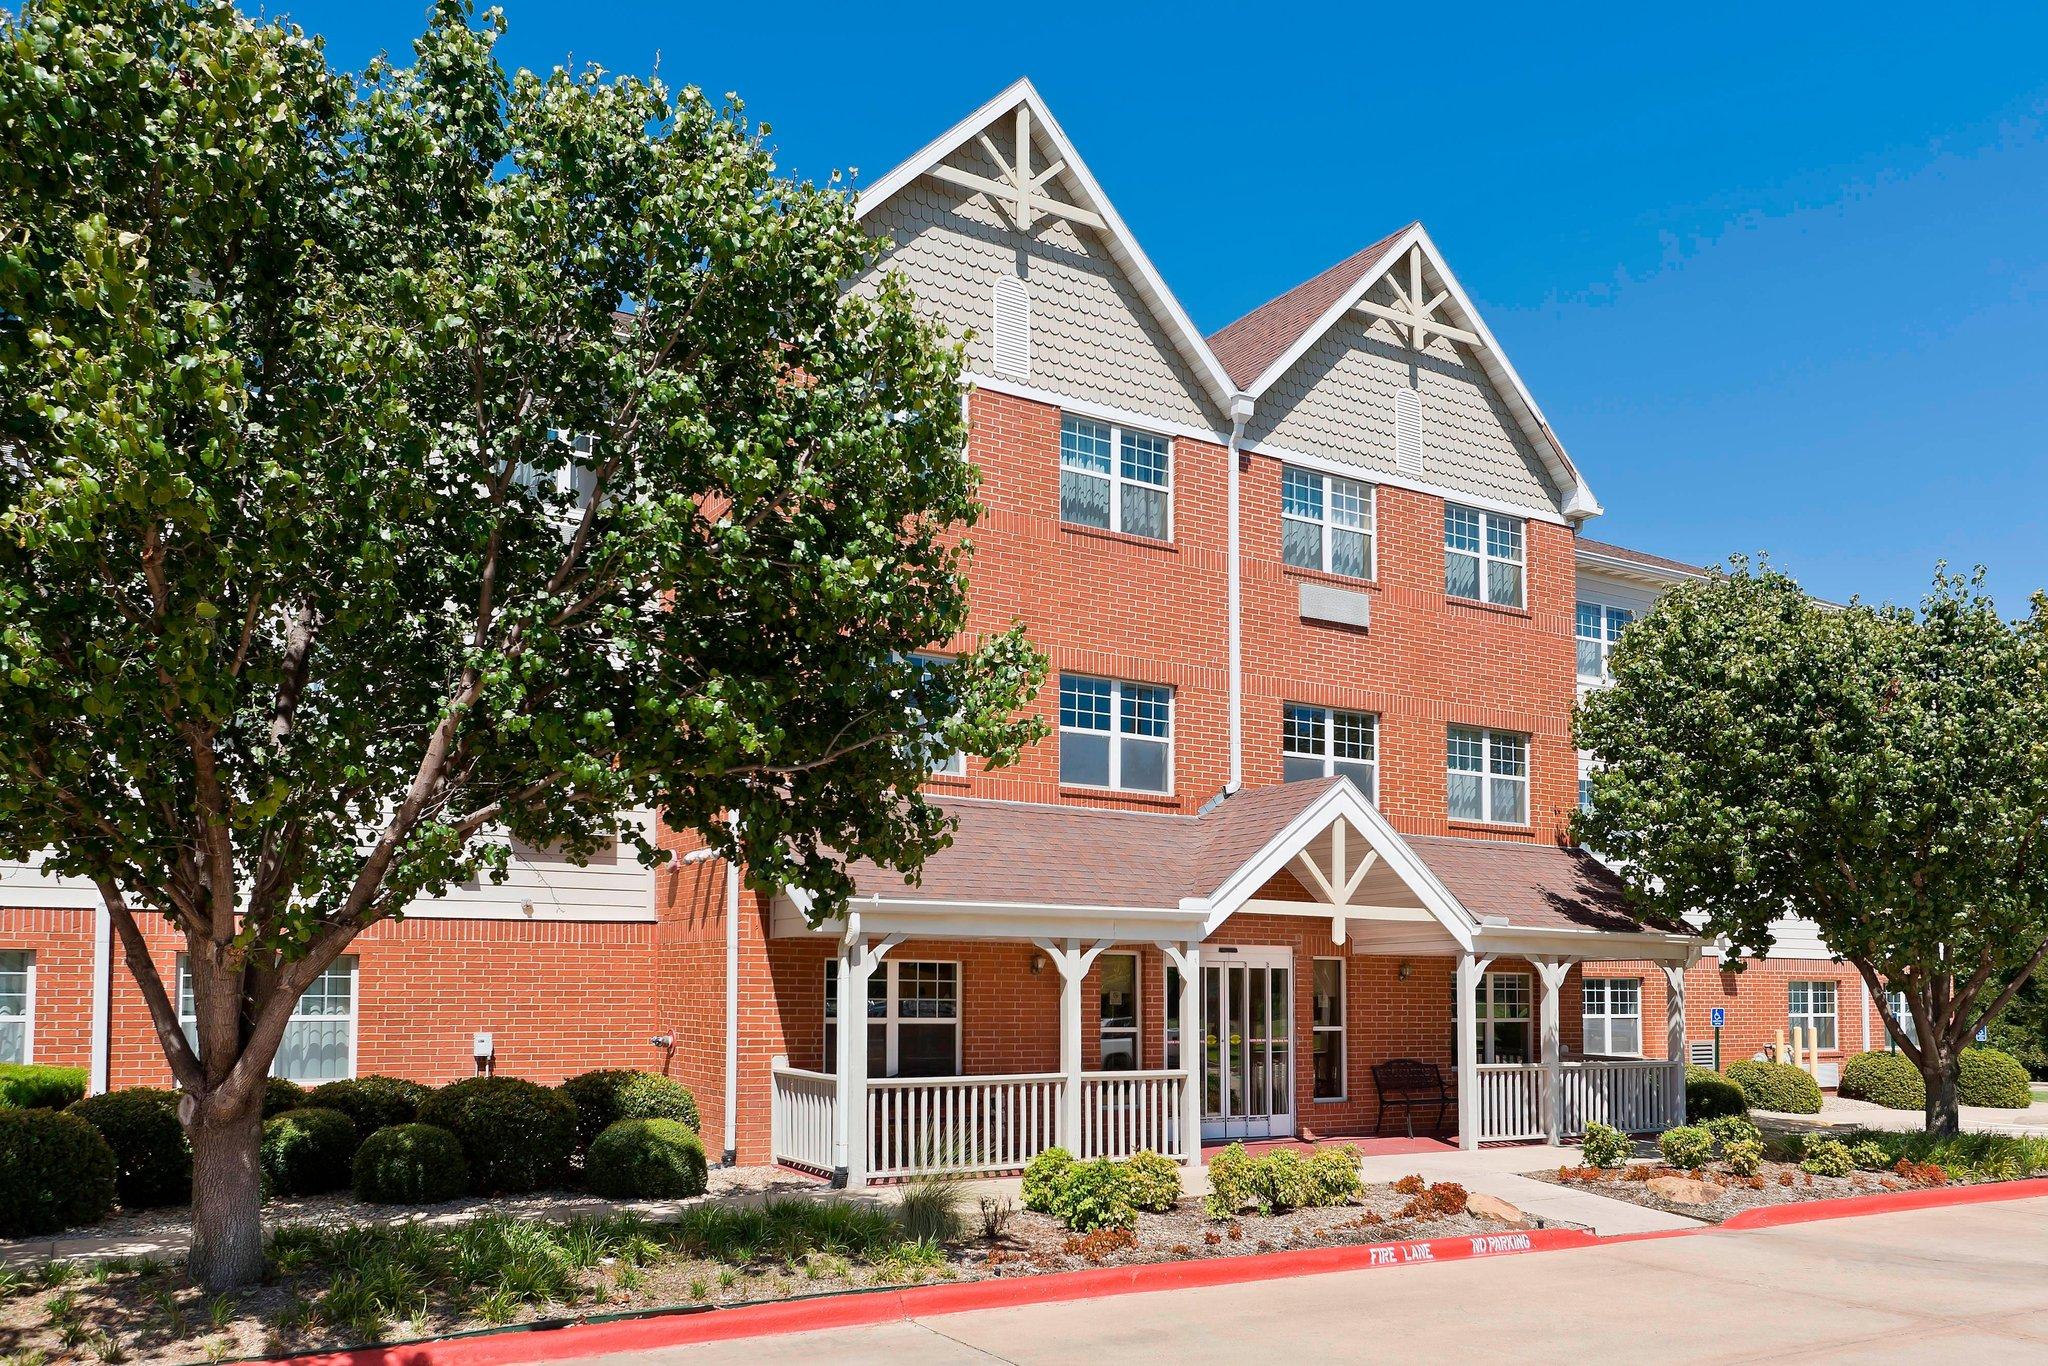 TownePlace Suites Dallas Bedford in Bedford, TX